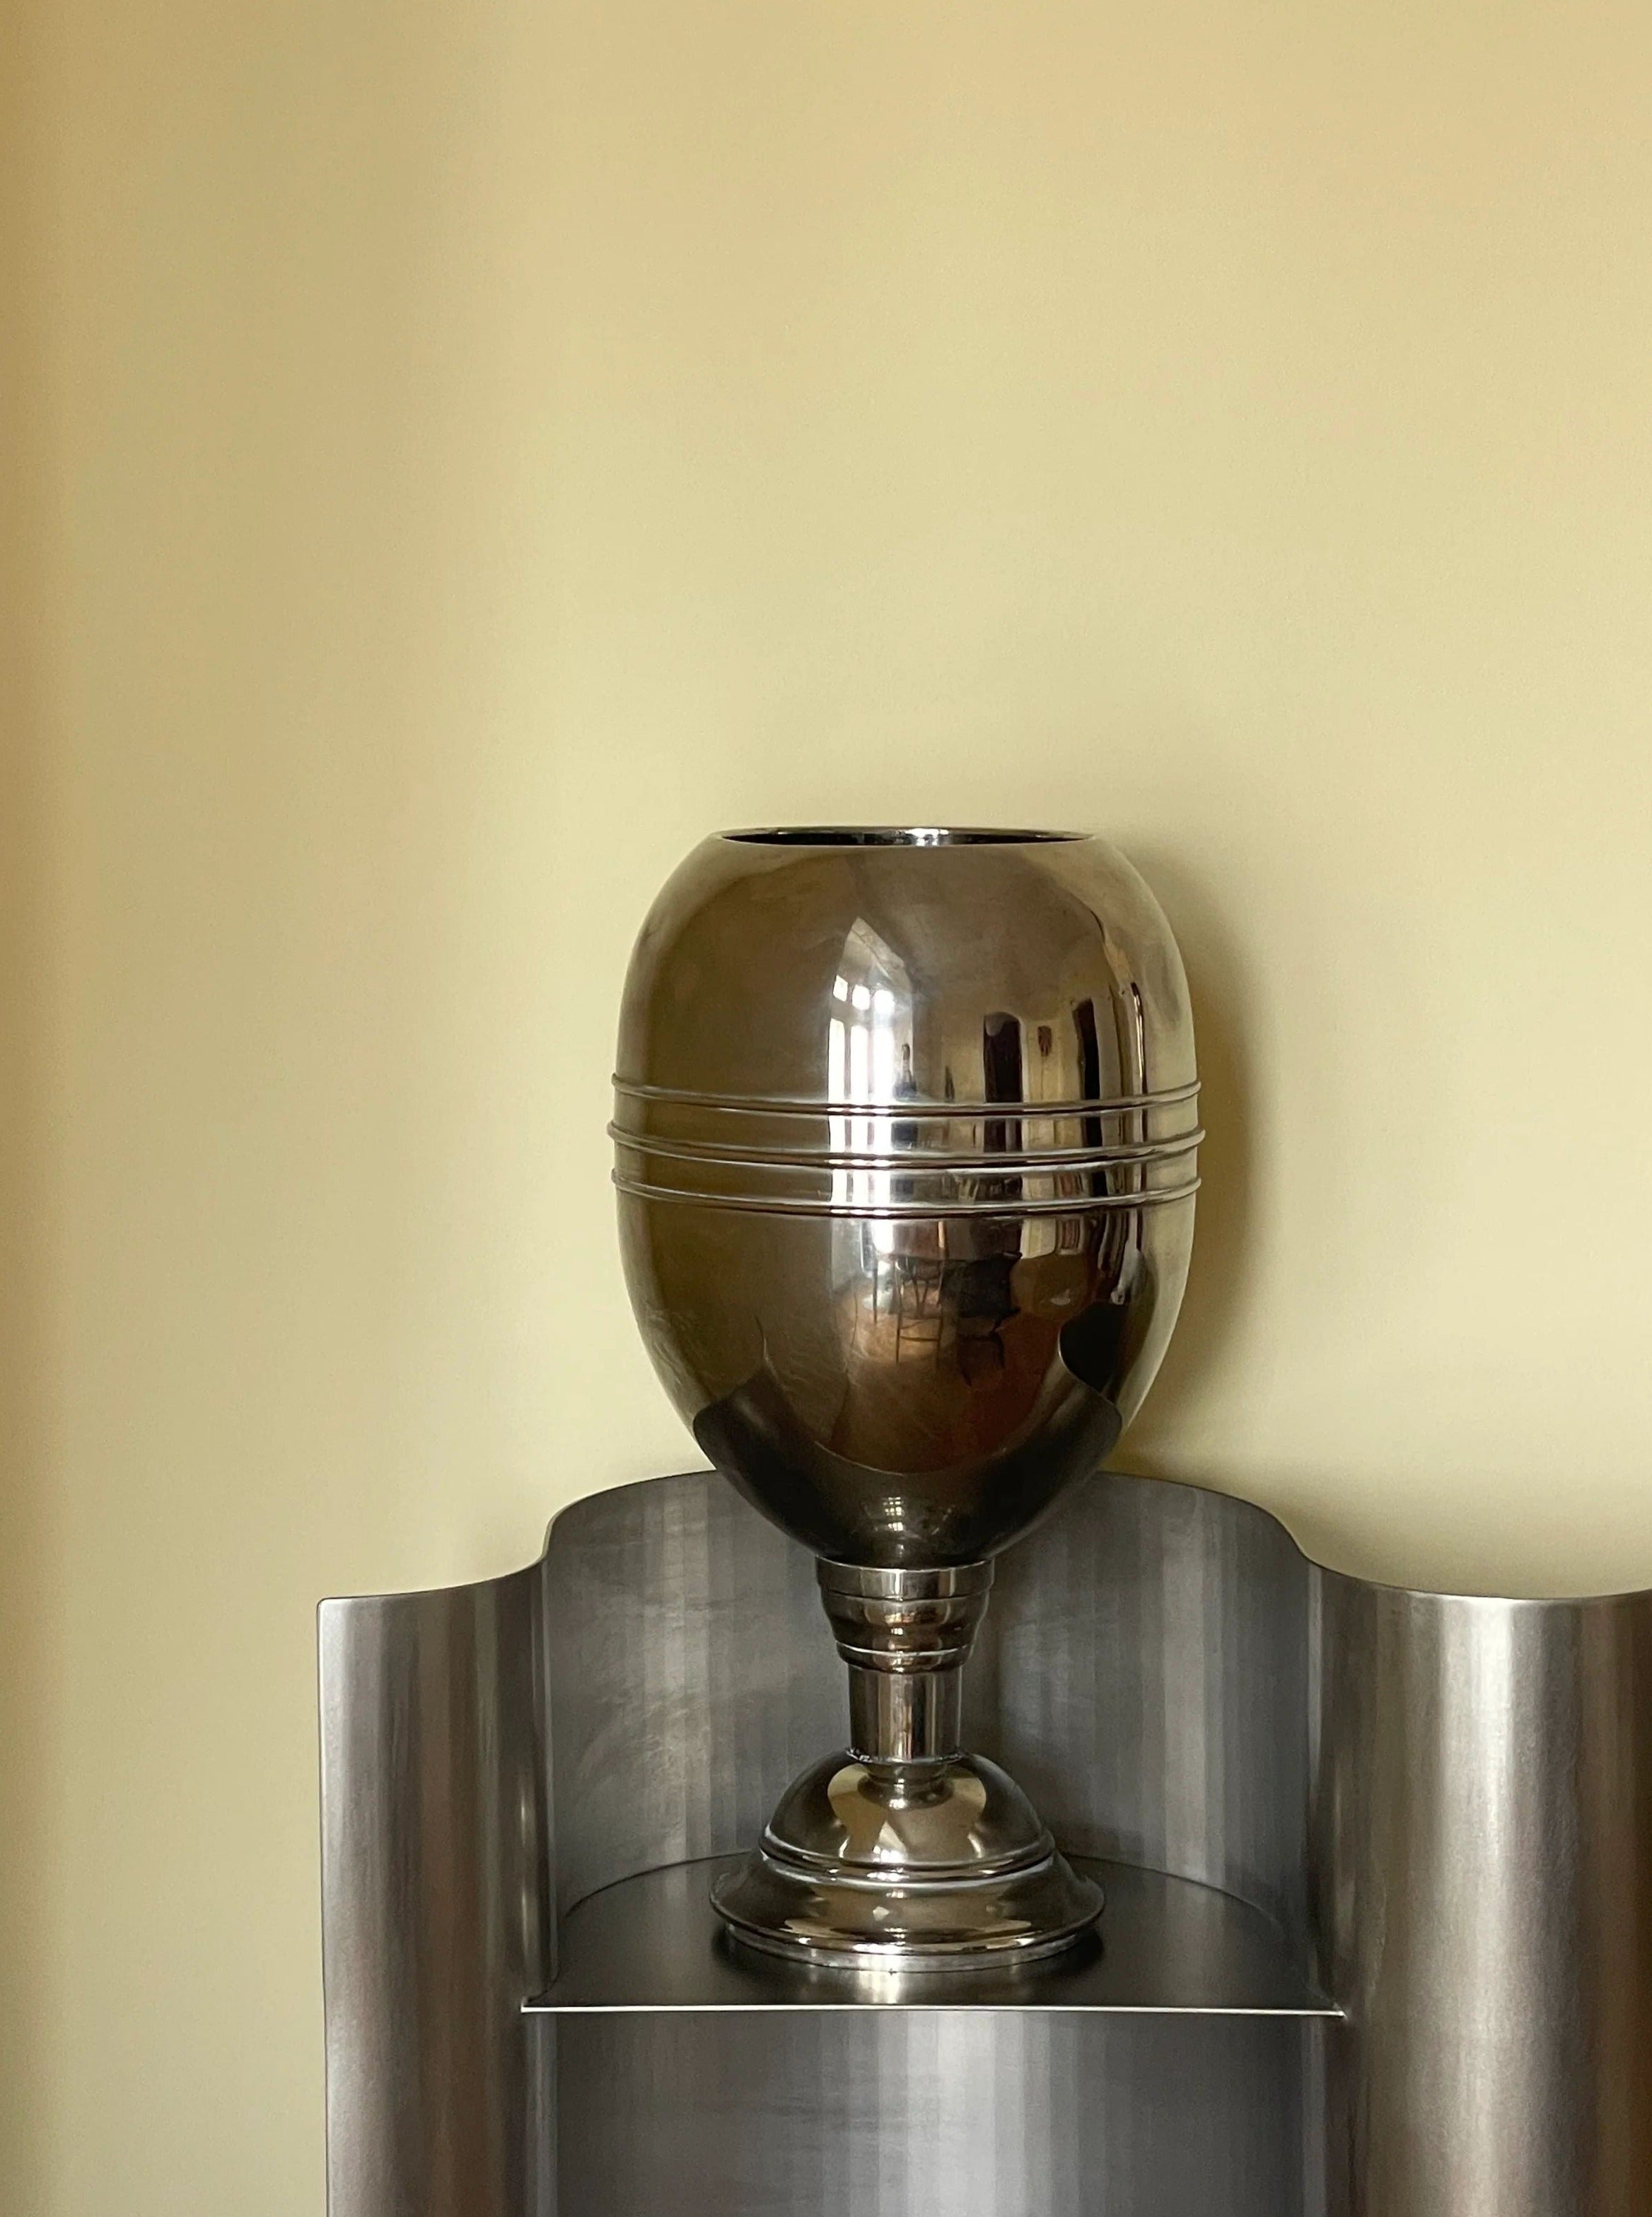 A sleek, steel Big steel vase with a reflective surface sits on a minimalistic pedestal against a plain light yellow wall. The trophy is shaped like a globe on a narrow stand. (Collect Cph)